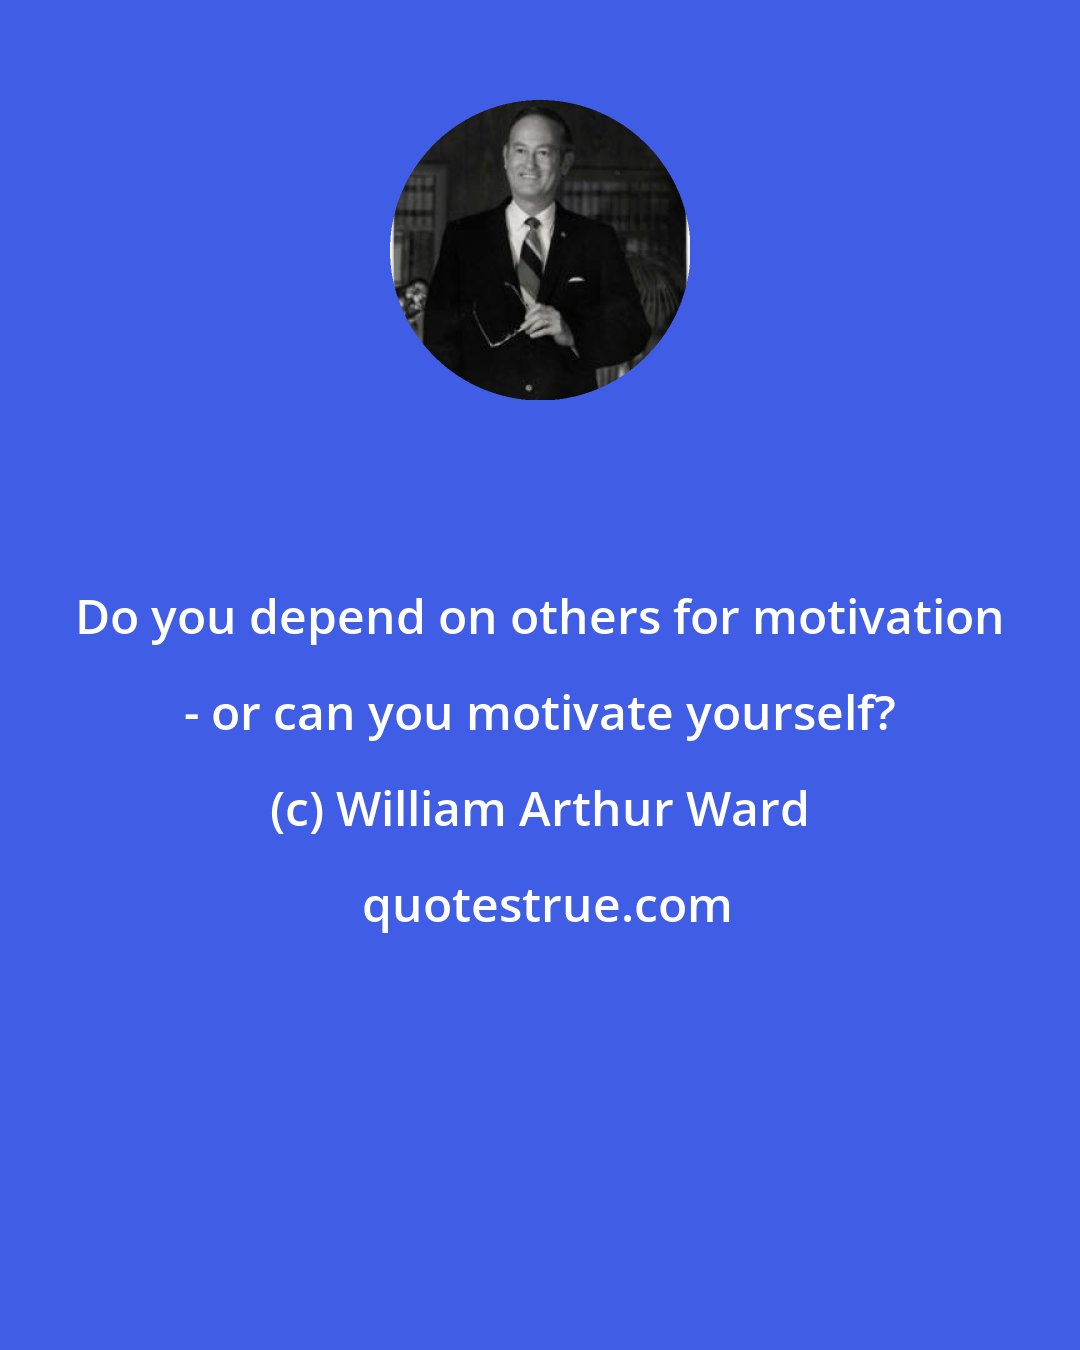 William Arthur Ward: Do you depend on others for motivation - or can you motivate yourself?